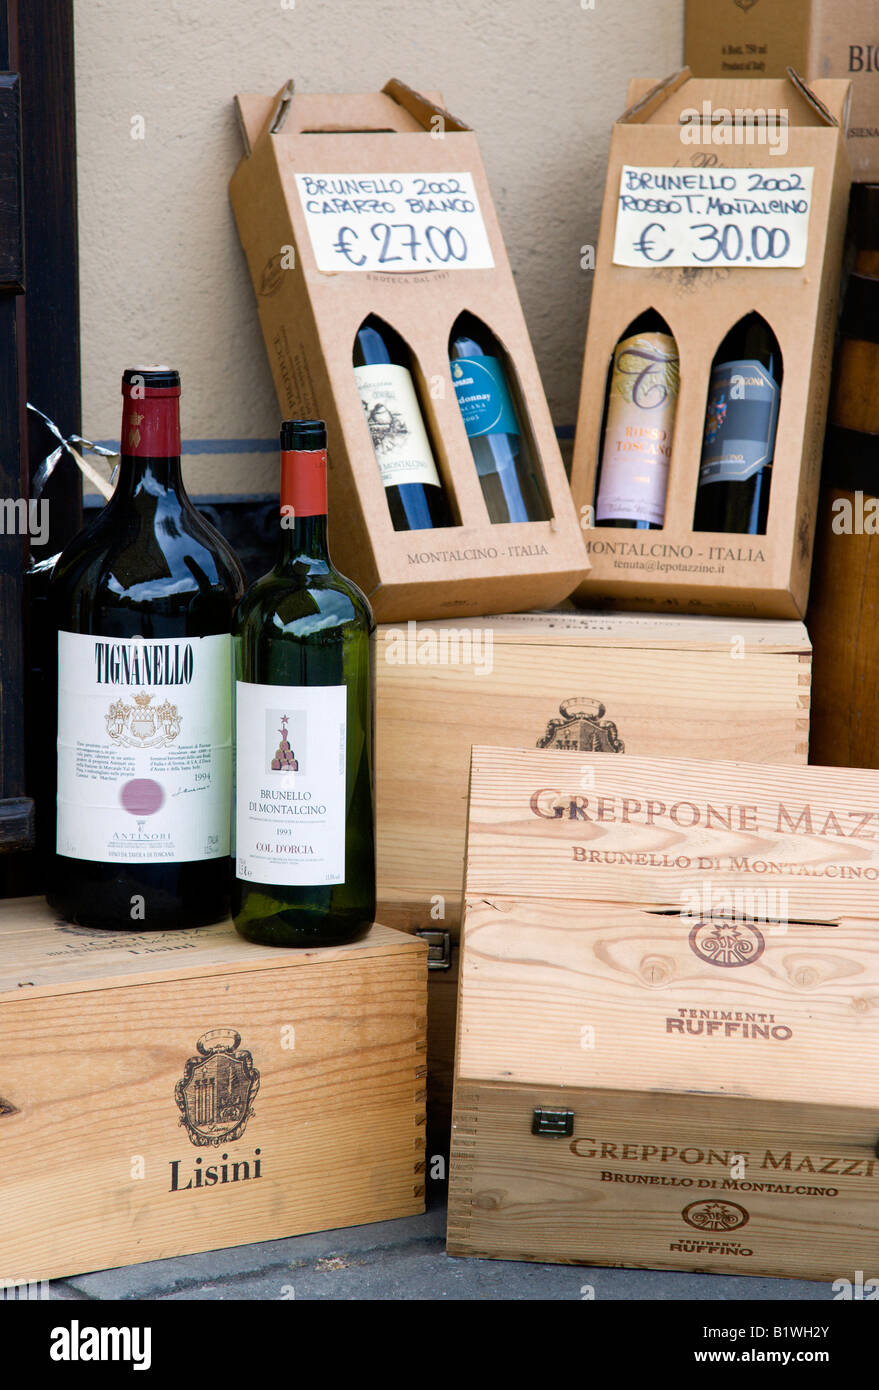 ITALY Tuscany Montalcino Red wine shop display in Medieval hill town of  different sized bottles and boxes with prices in Euros Stock Photo - Alamy